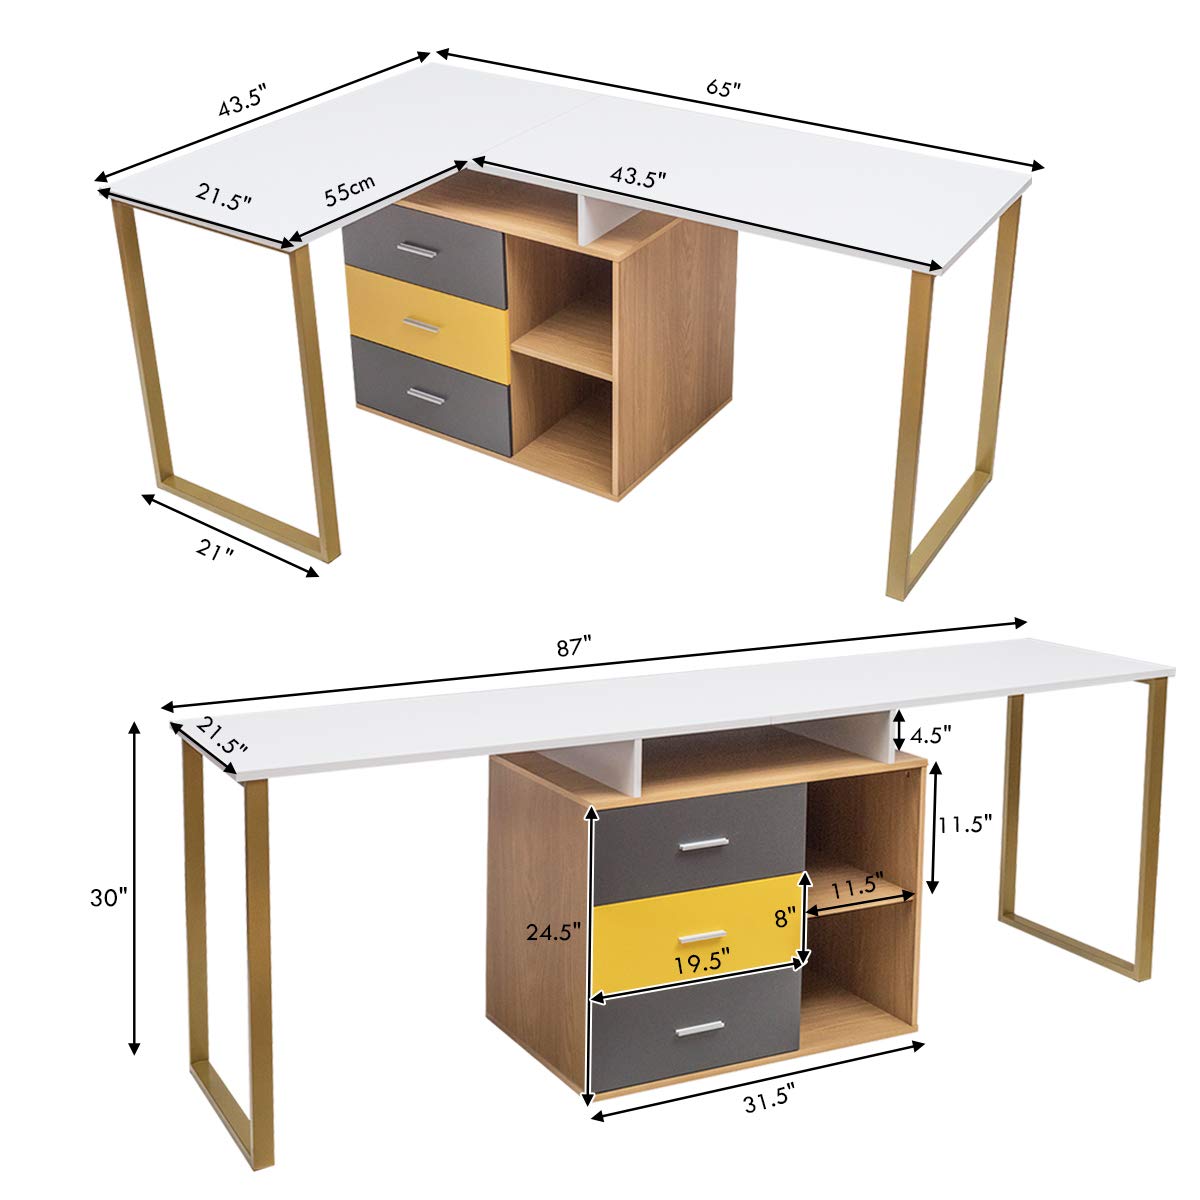 Tangkula 2 Person Computer Desk, 79 Inch Double Workstation Desk with  Storage Cubes and Adjustable Foot Pads, Extra Large & Sturdy Writing Table  for